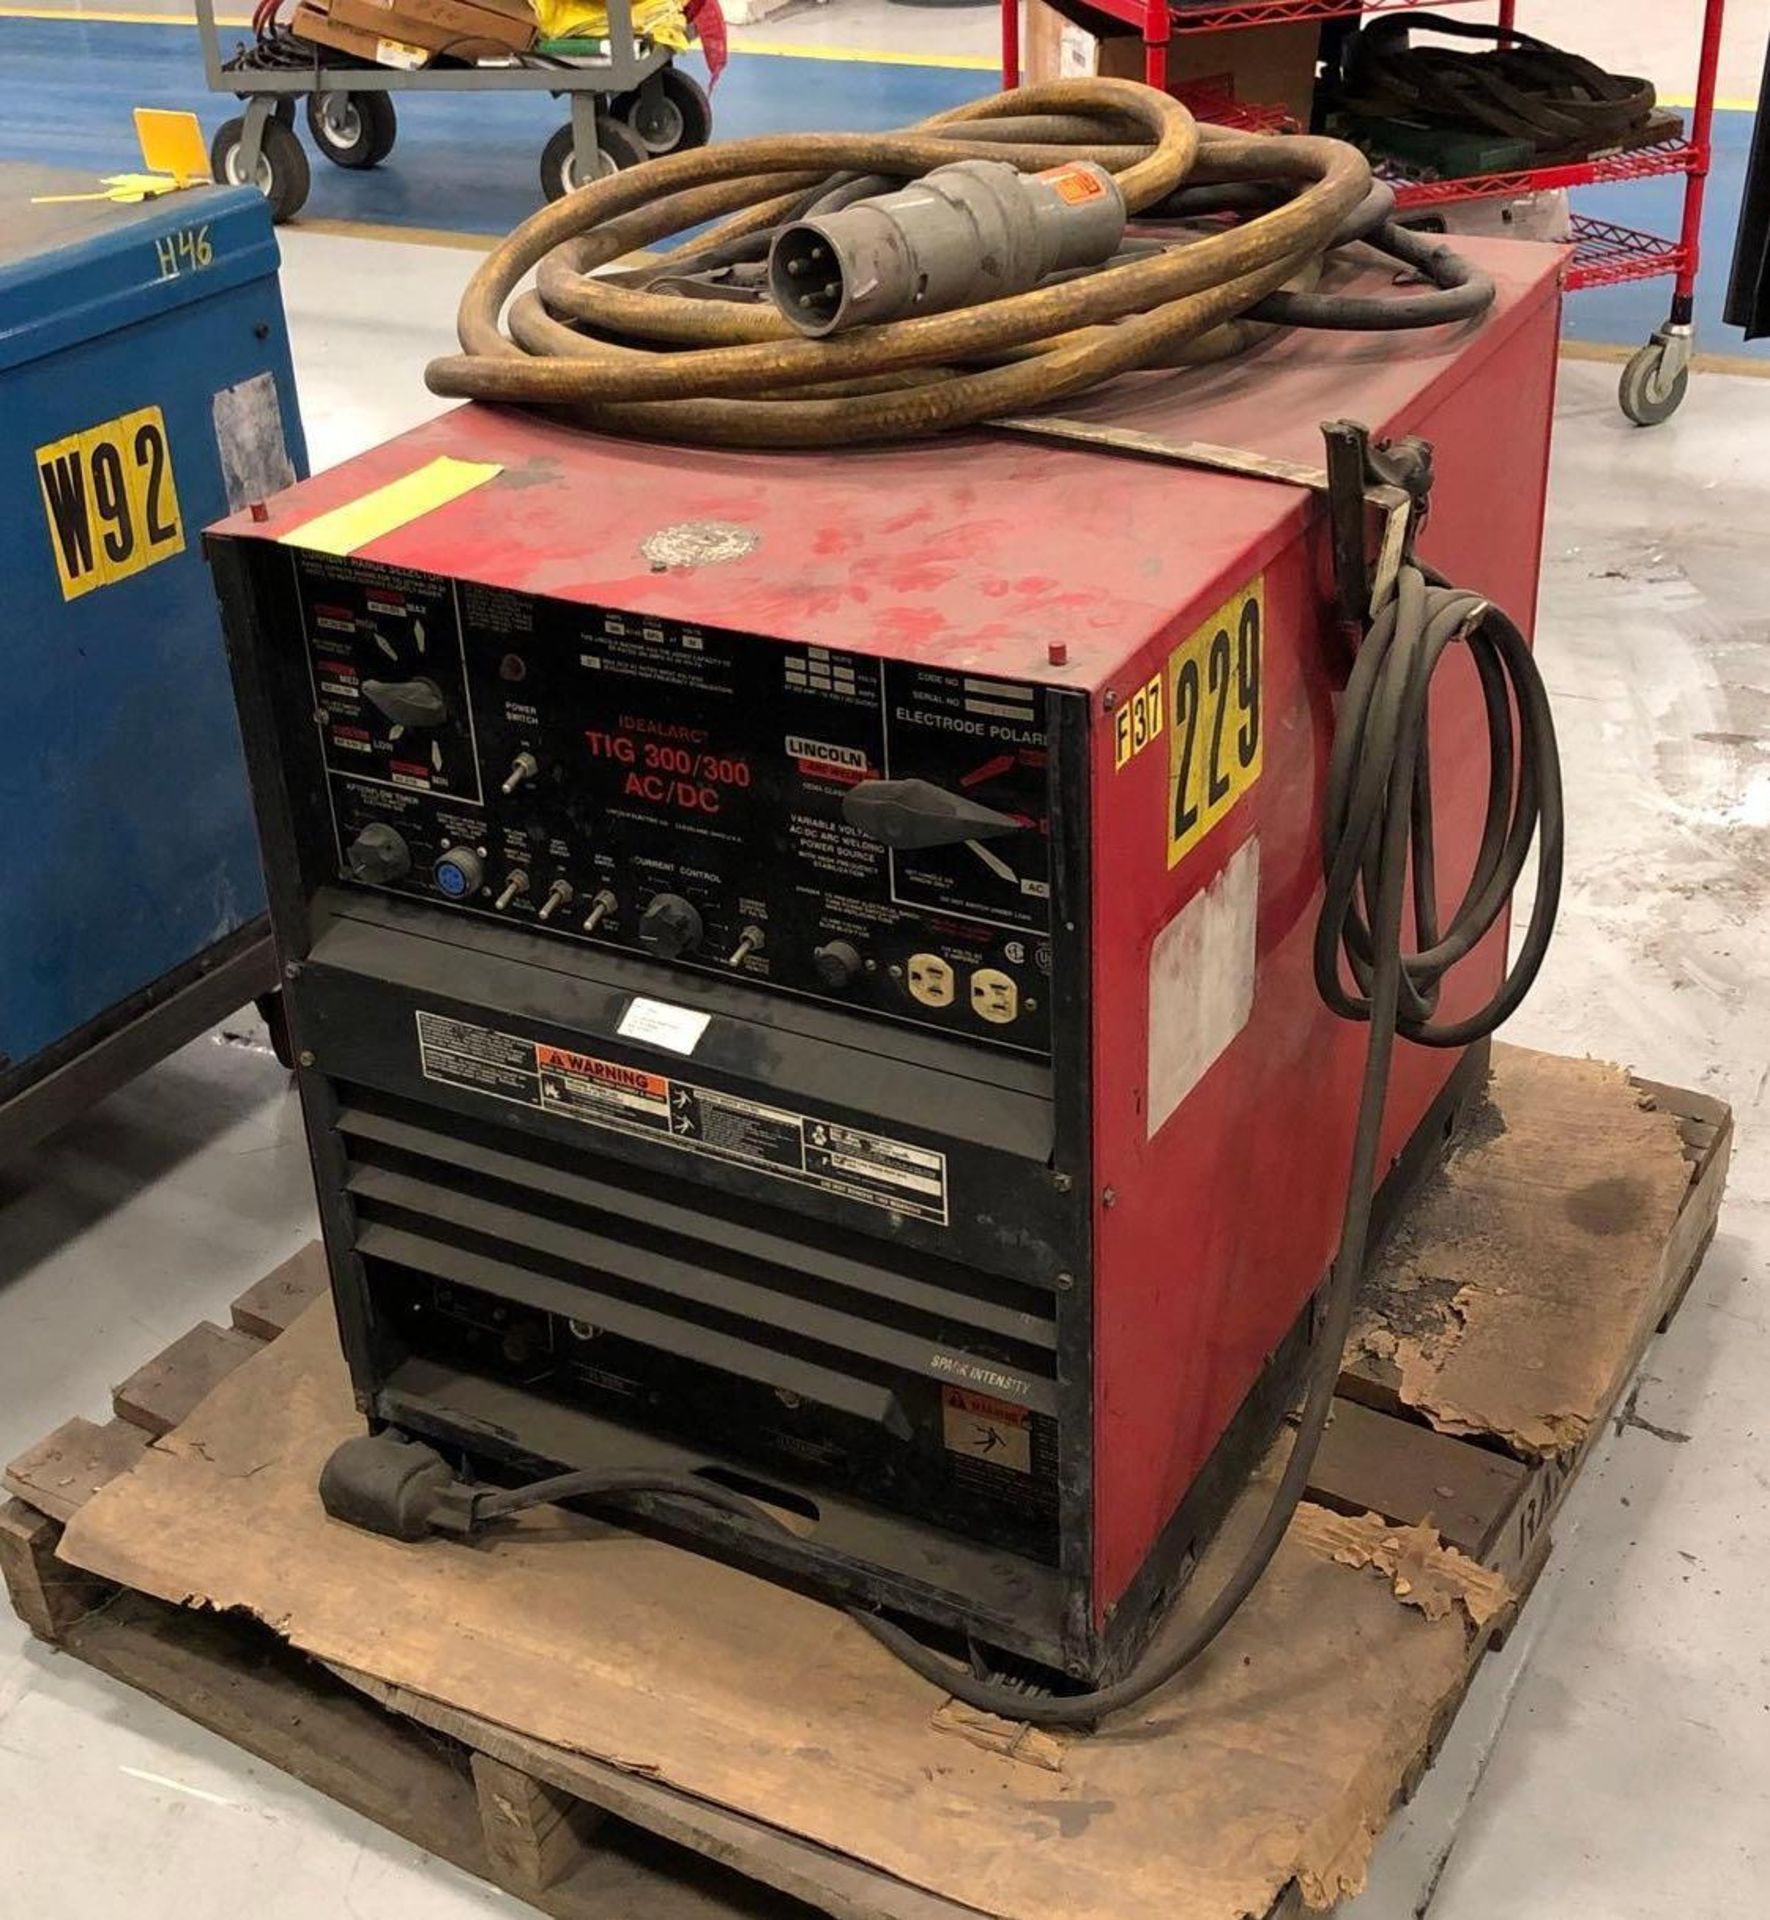 Lincoln 300Amp Idealarc TIG 300/300 Power Supply w/ Cables